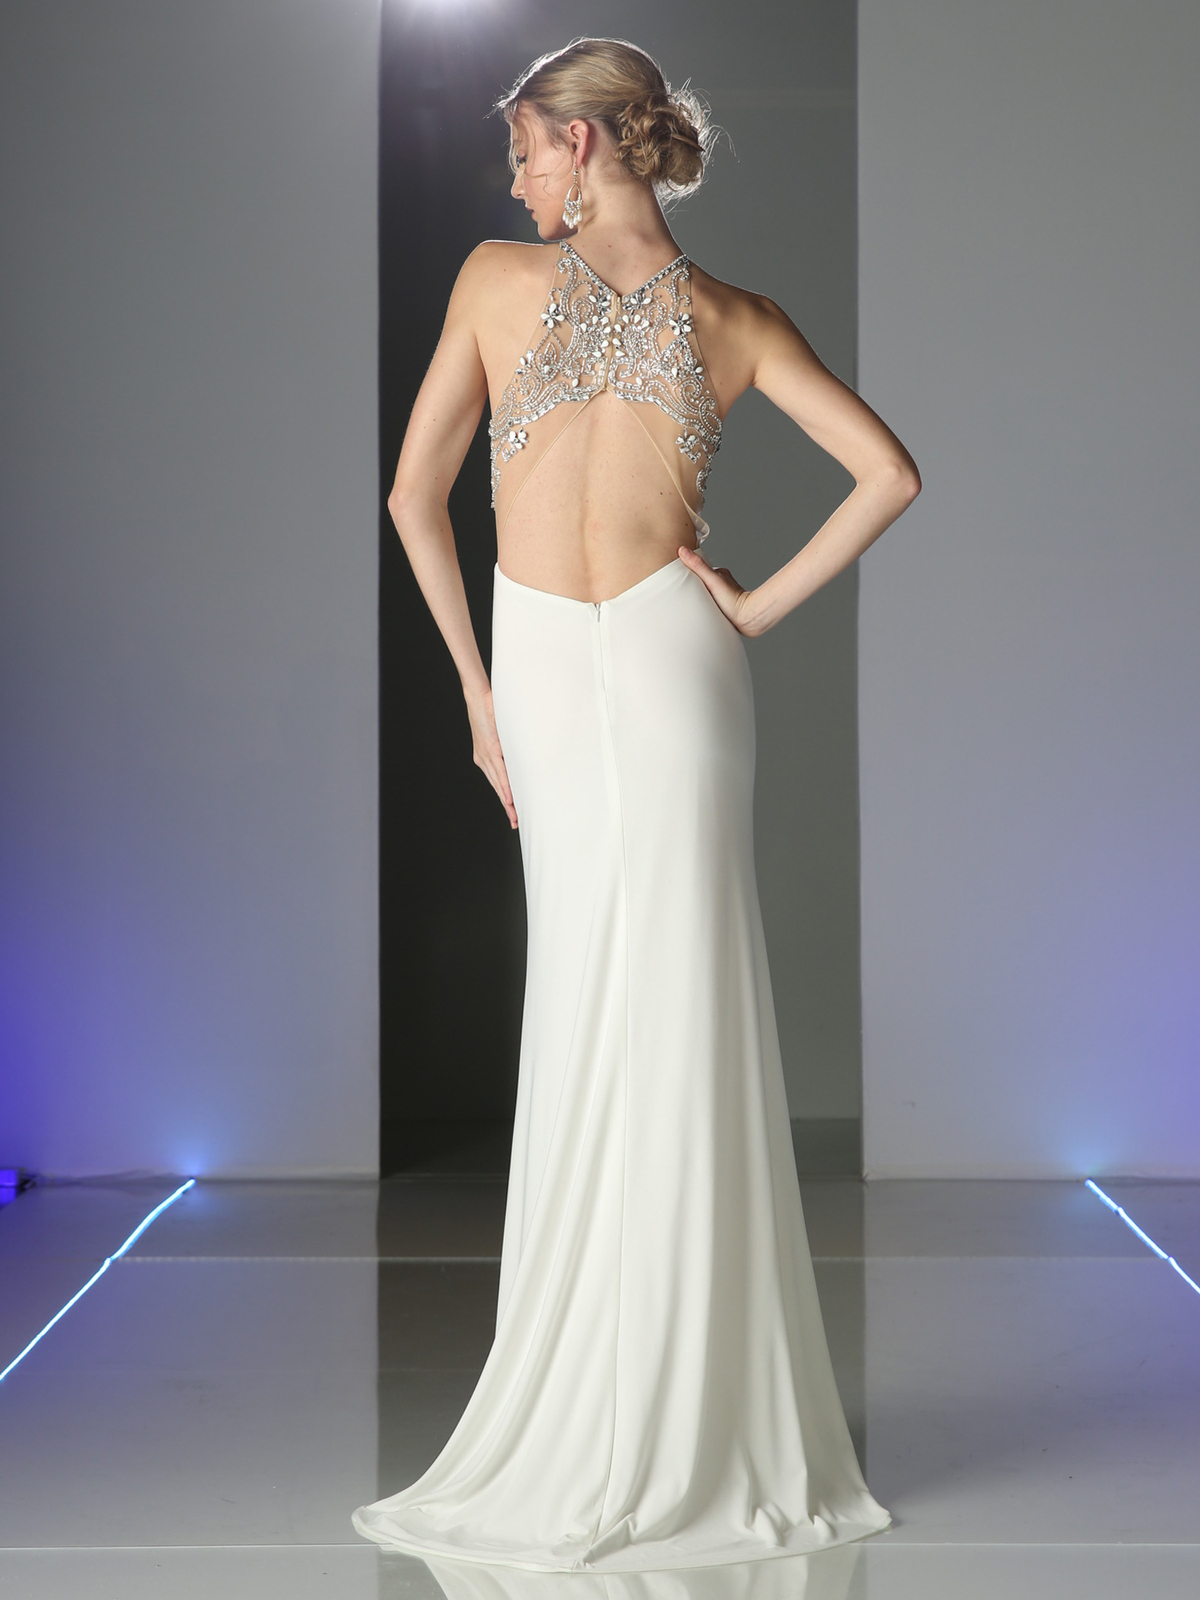 Jeweled Strap Halter Top Evening Dress | Sung Boutique L.A.1200 x 1600